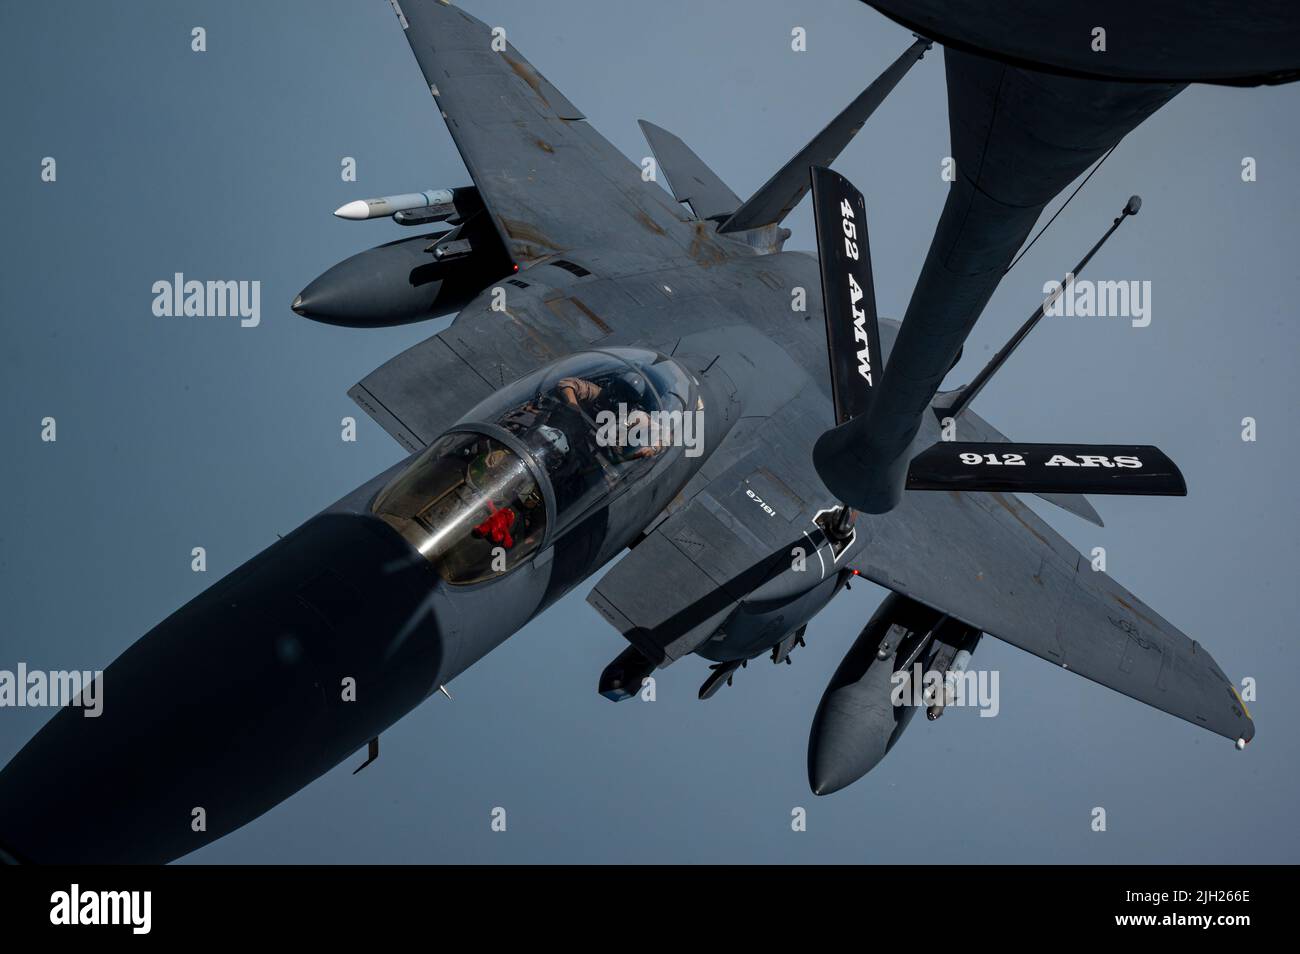 Al Udeid Air Base, Qatar. 13th July, 2022. A U.S. Air Force F-15E Strike Eagle fighter aircraft assigned to the 335th Expeditionary Fighter Squadron, refuels from a KC-135R Stratotanker aircraft during a Central Command rapid deployment exercise, July 13, 2022 near Al Udeid Air Base, Qatar. Credit: SSgt. Christian Sullivan/U.S. Air Force/Alamy Live News Stock Photo